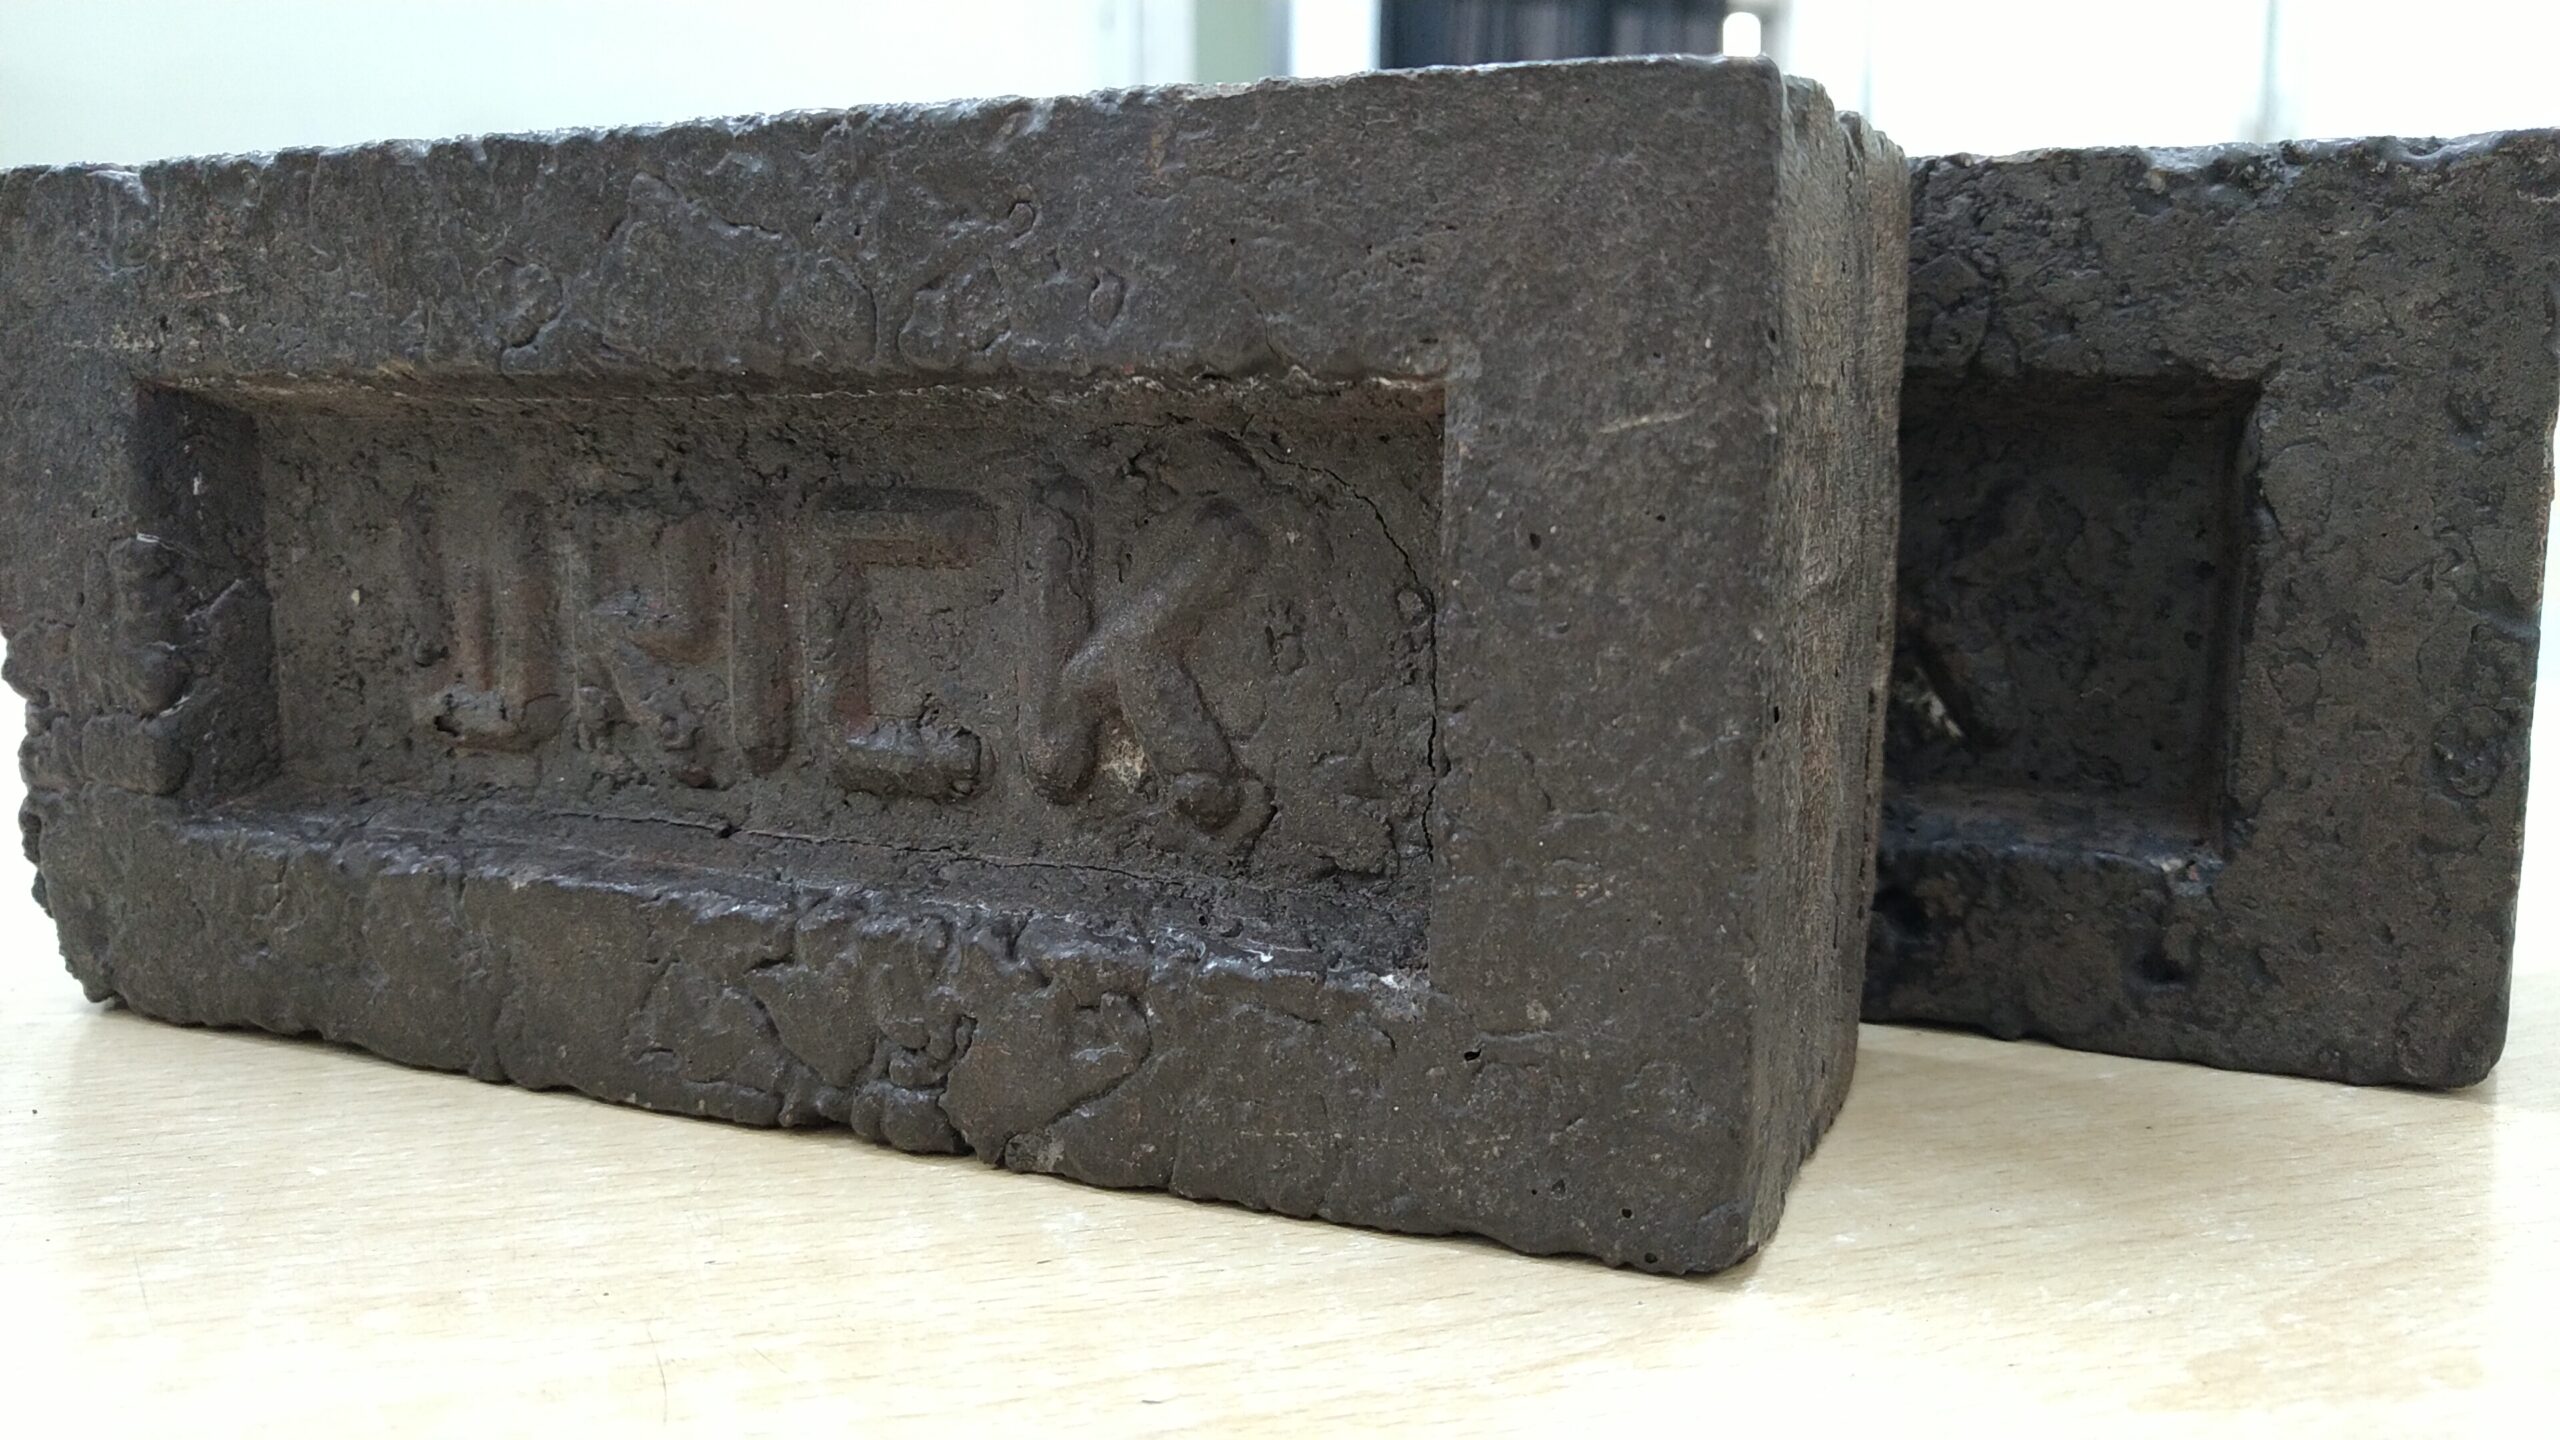 Recycled Waste Bricks To The Rescue